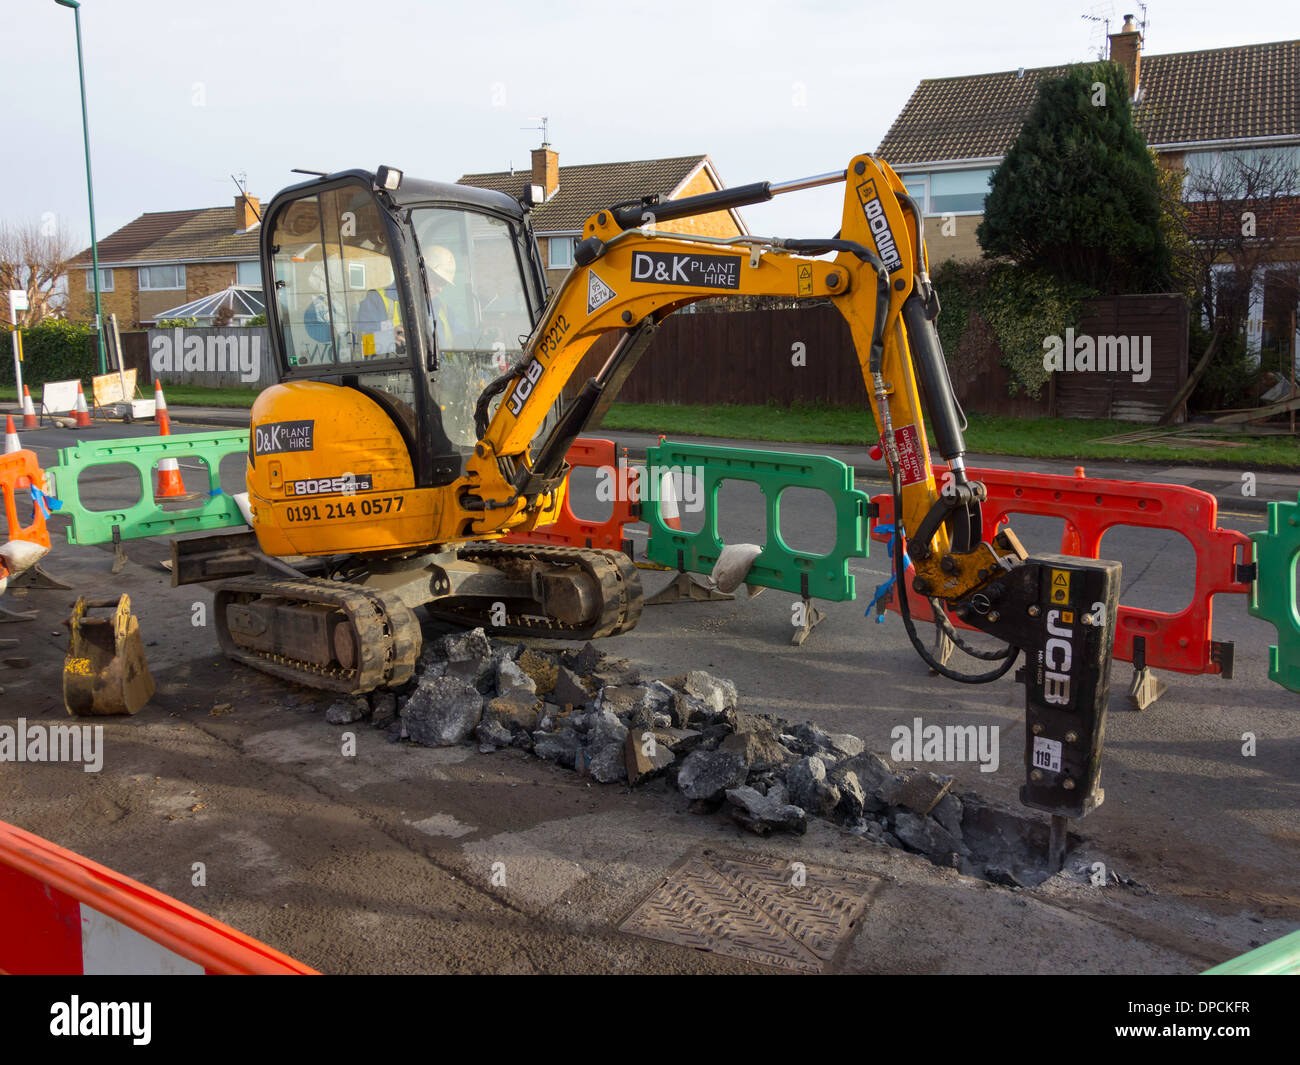 A JCB mini excavator fitted with an hydraulic pick excavating a trench for renewal of a water main pipe Stock Photo